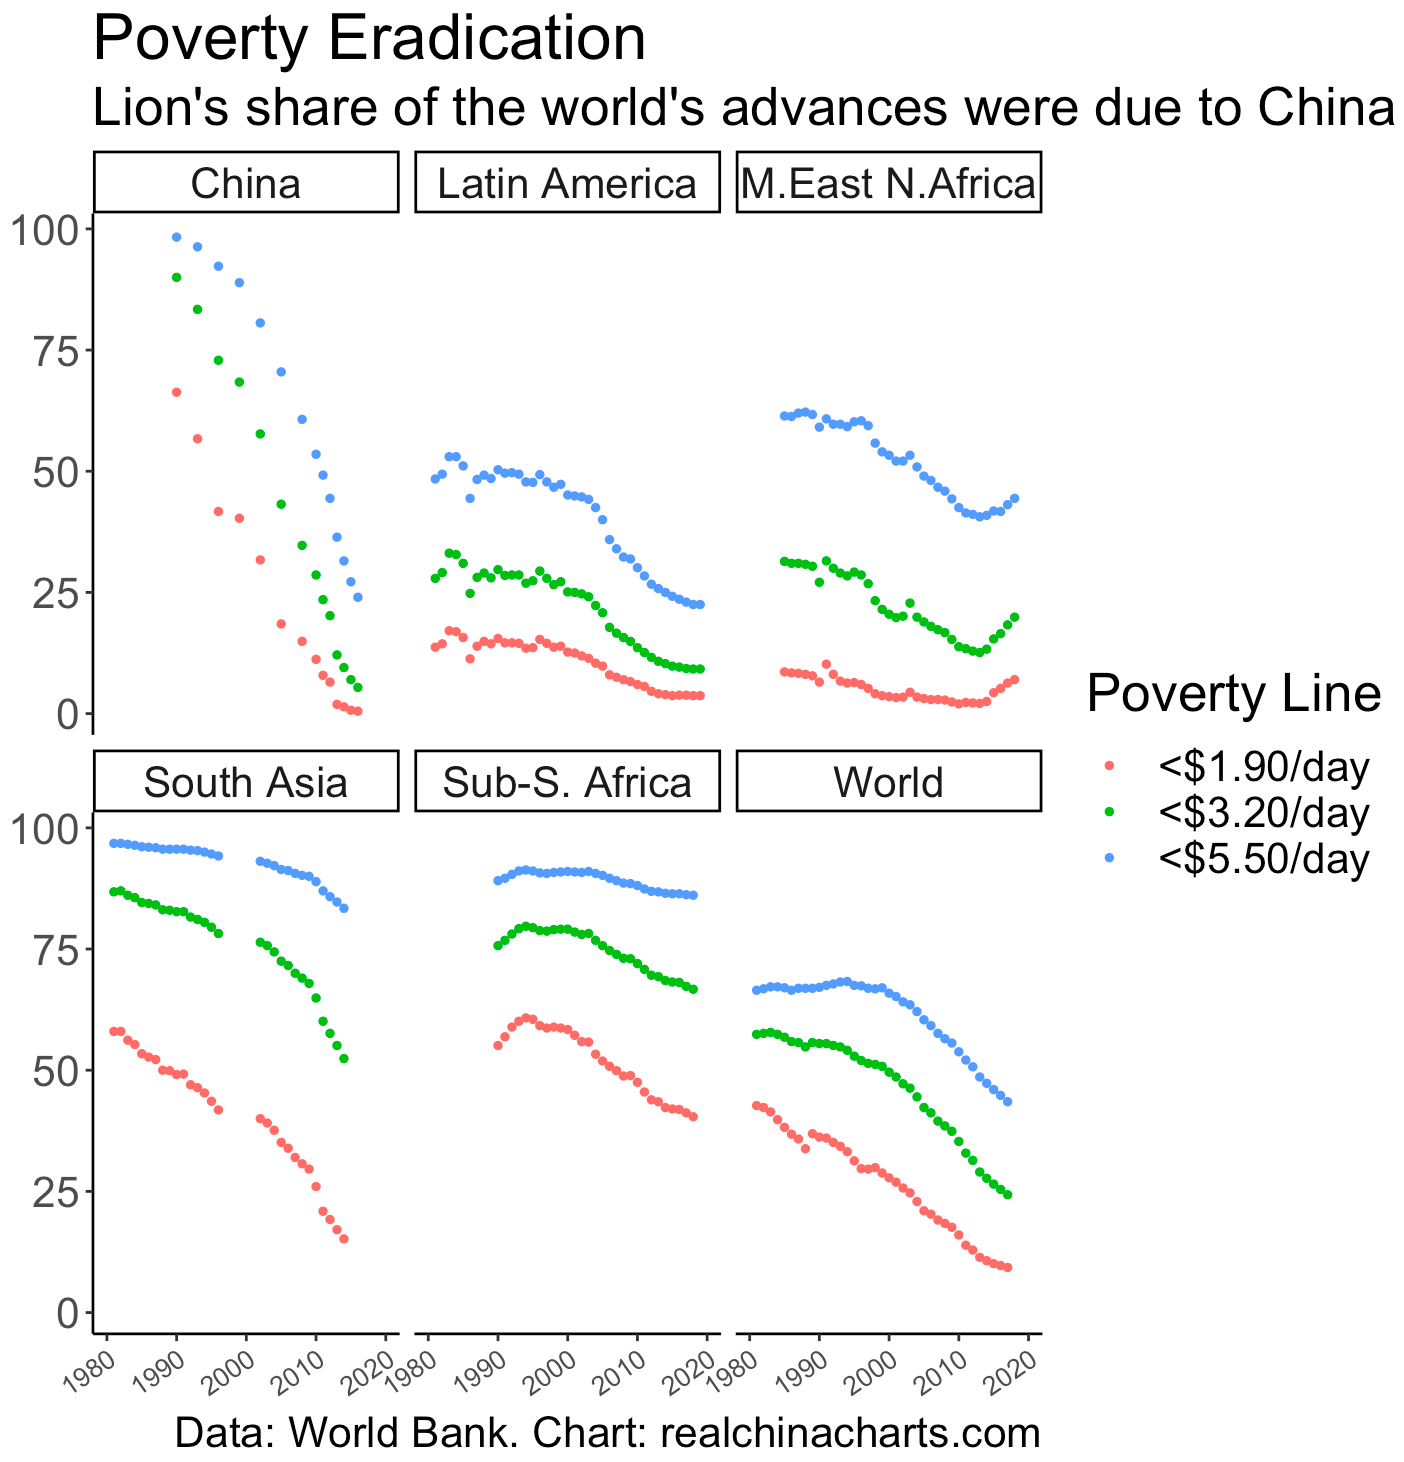 Poverty lines across countries including China